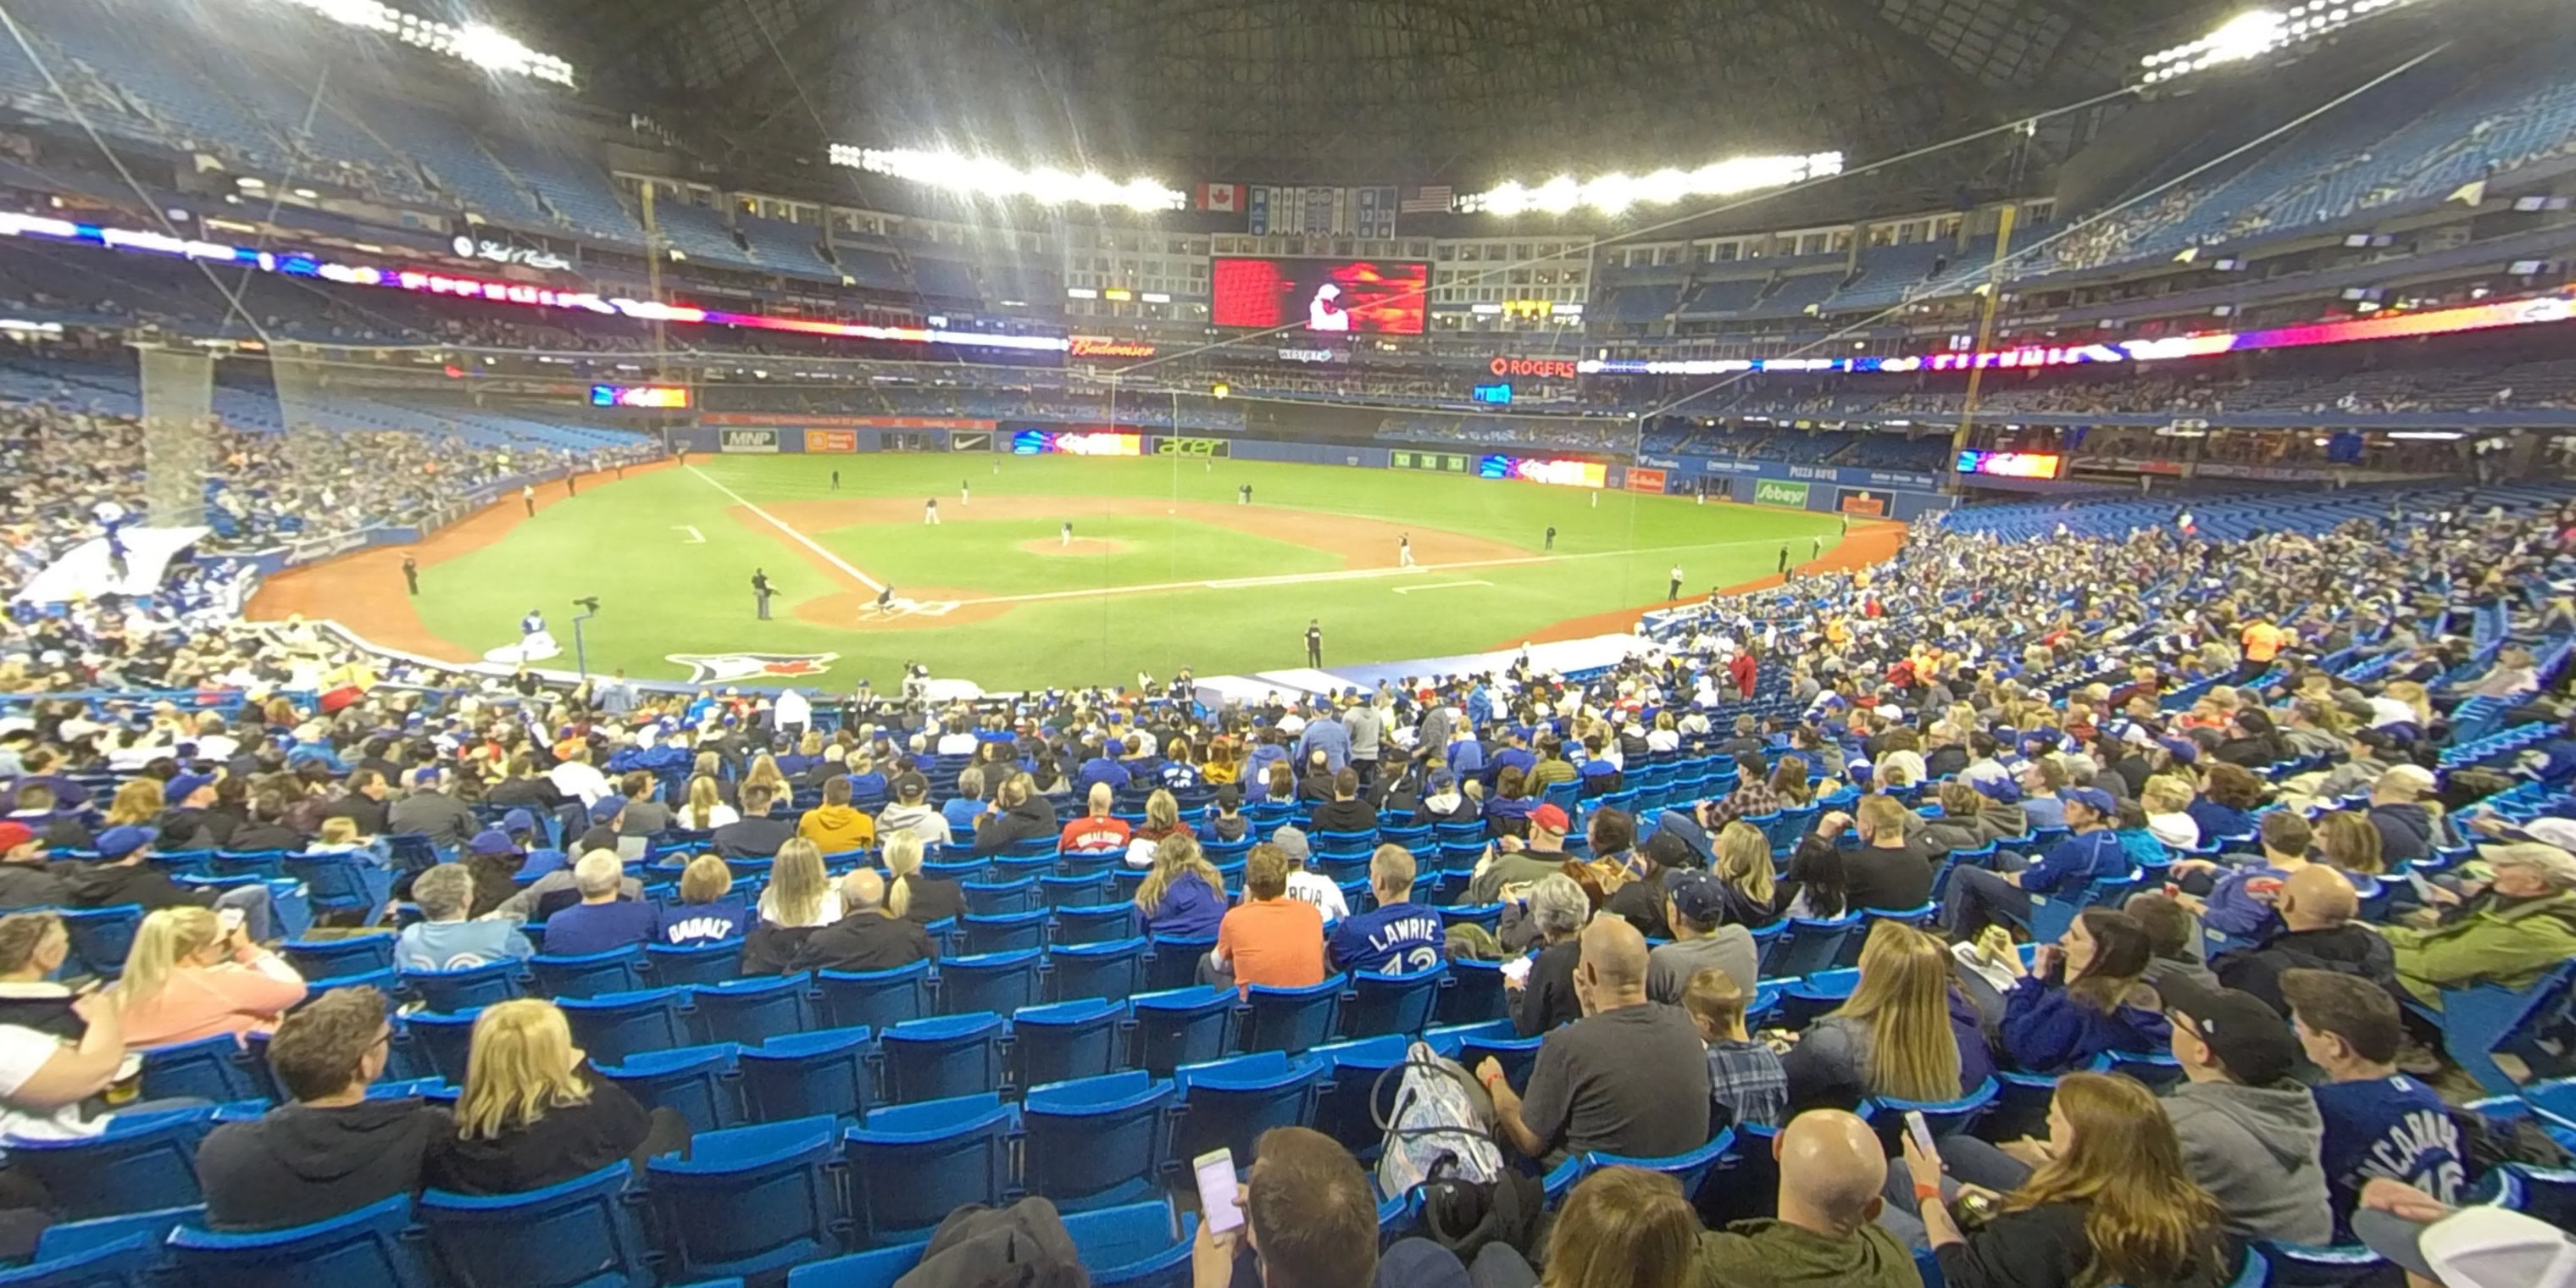 5/26/11 at Rogers Centre